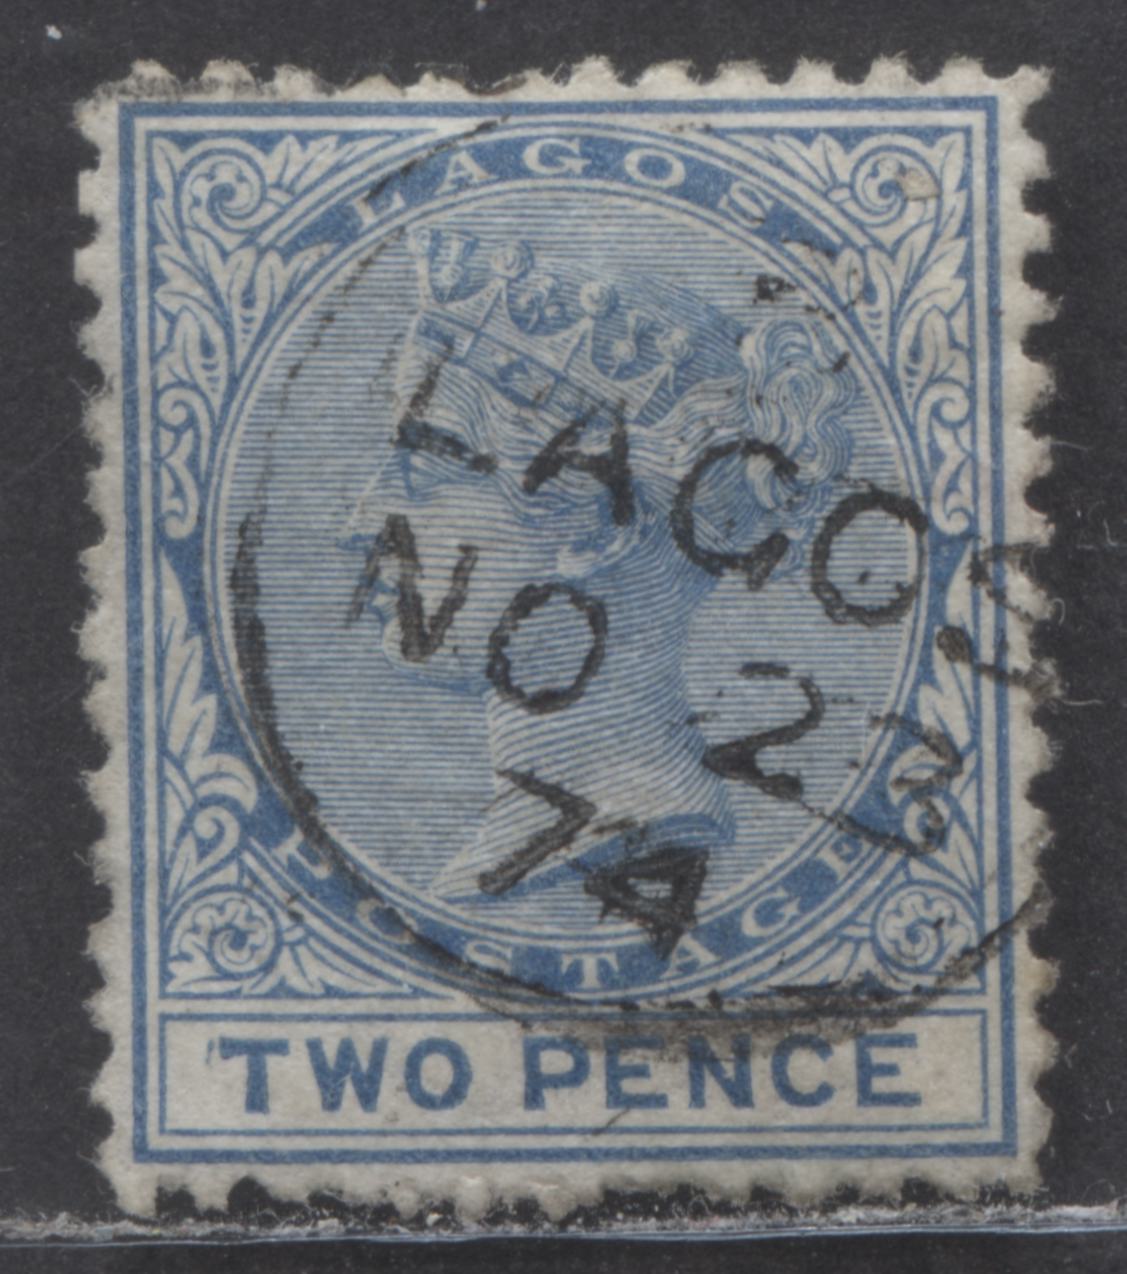 Lot 9 Lagos SC#2 2d Deep Blue & Prussian Blue 2nd Printing From Sept 14, 1874, Queen Victoria, Duty Plate Shows Apostrophe Flaw, Scarcer Proud Type D4 Lagos CDS Nov 23, 1874 With Lagos In Center, VF Used Stamp, Est Value $75 USD